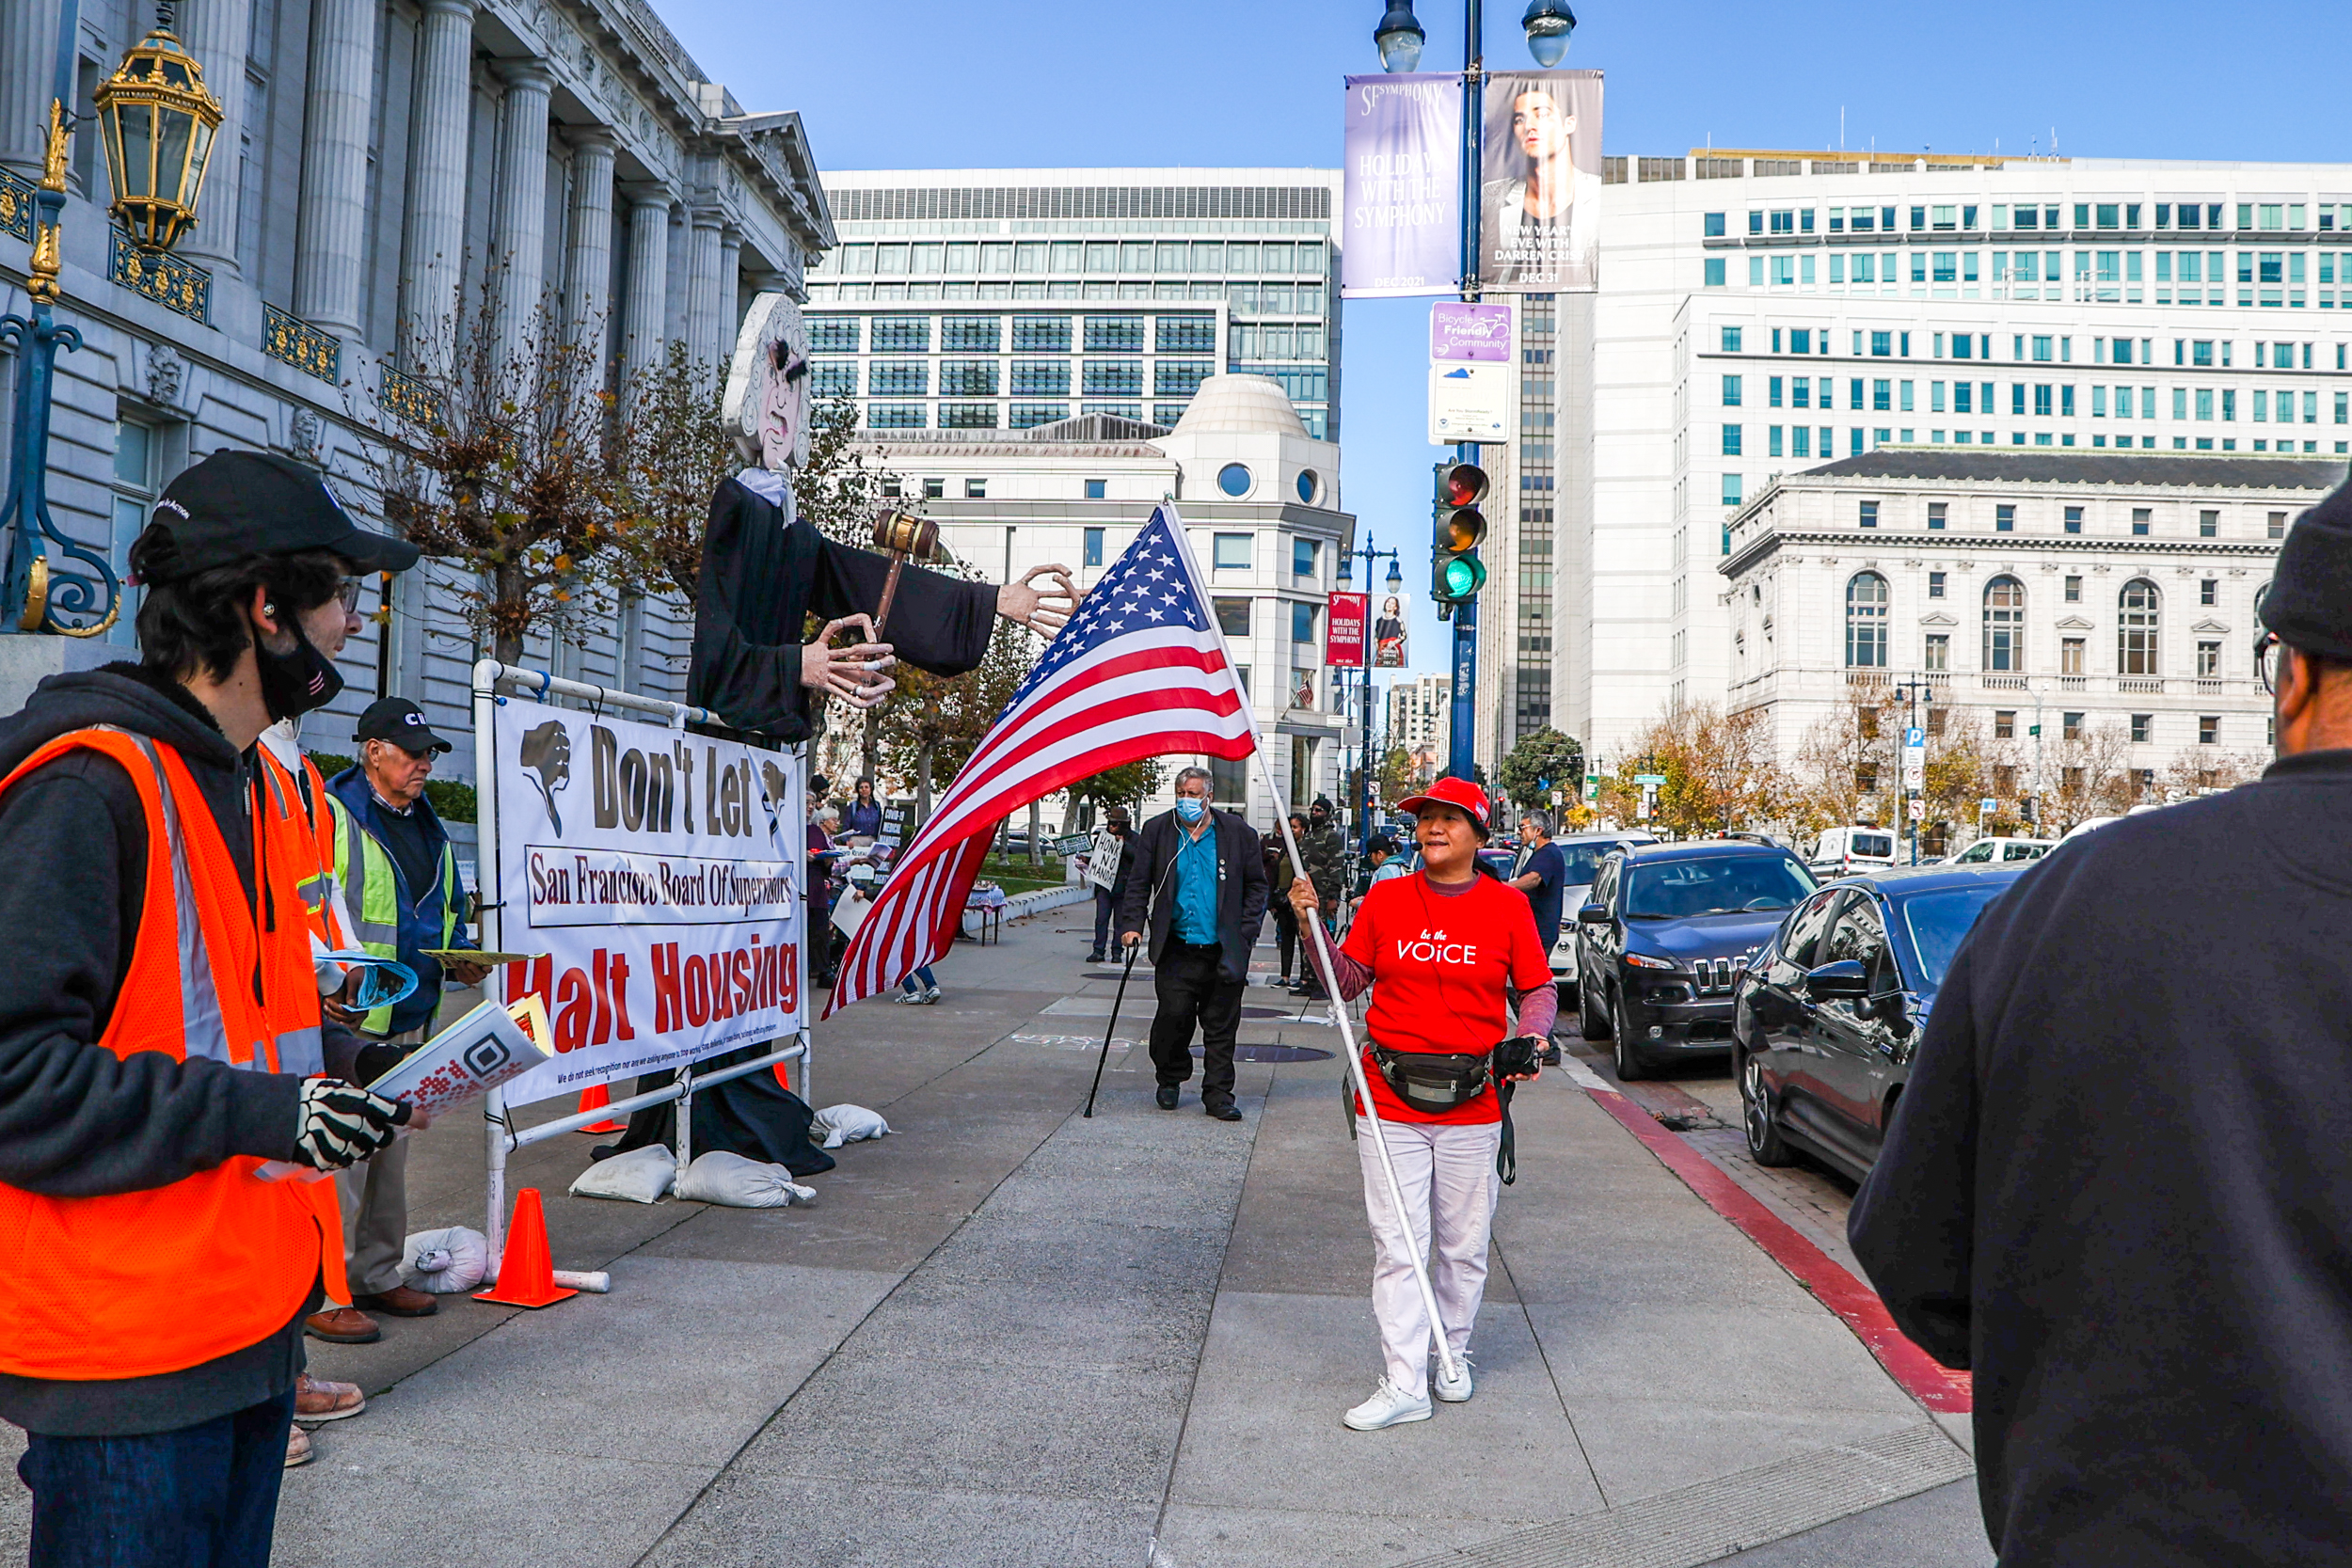 A protest scene with a person holding a large U.S. flag next to a giant puppet judge, and a banner about housing.